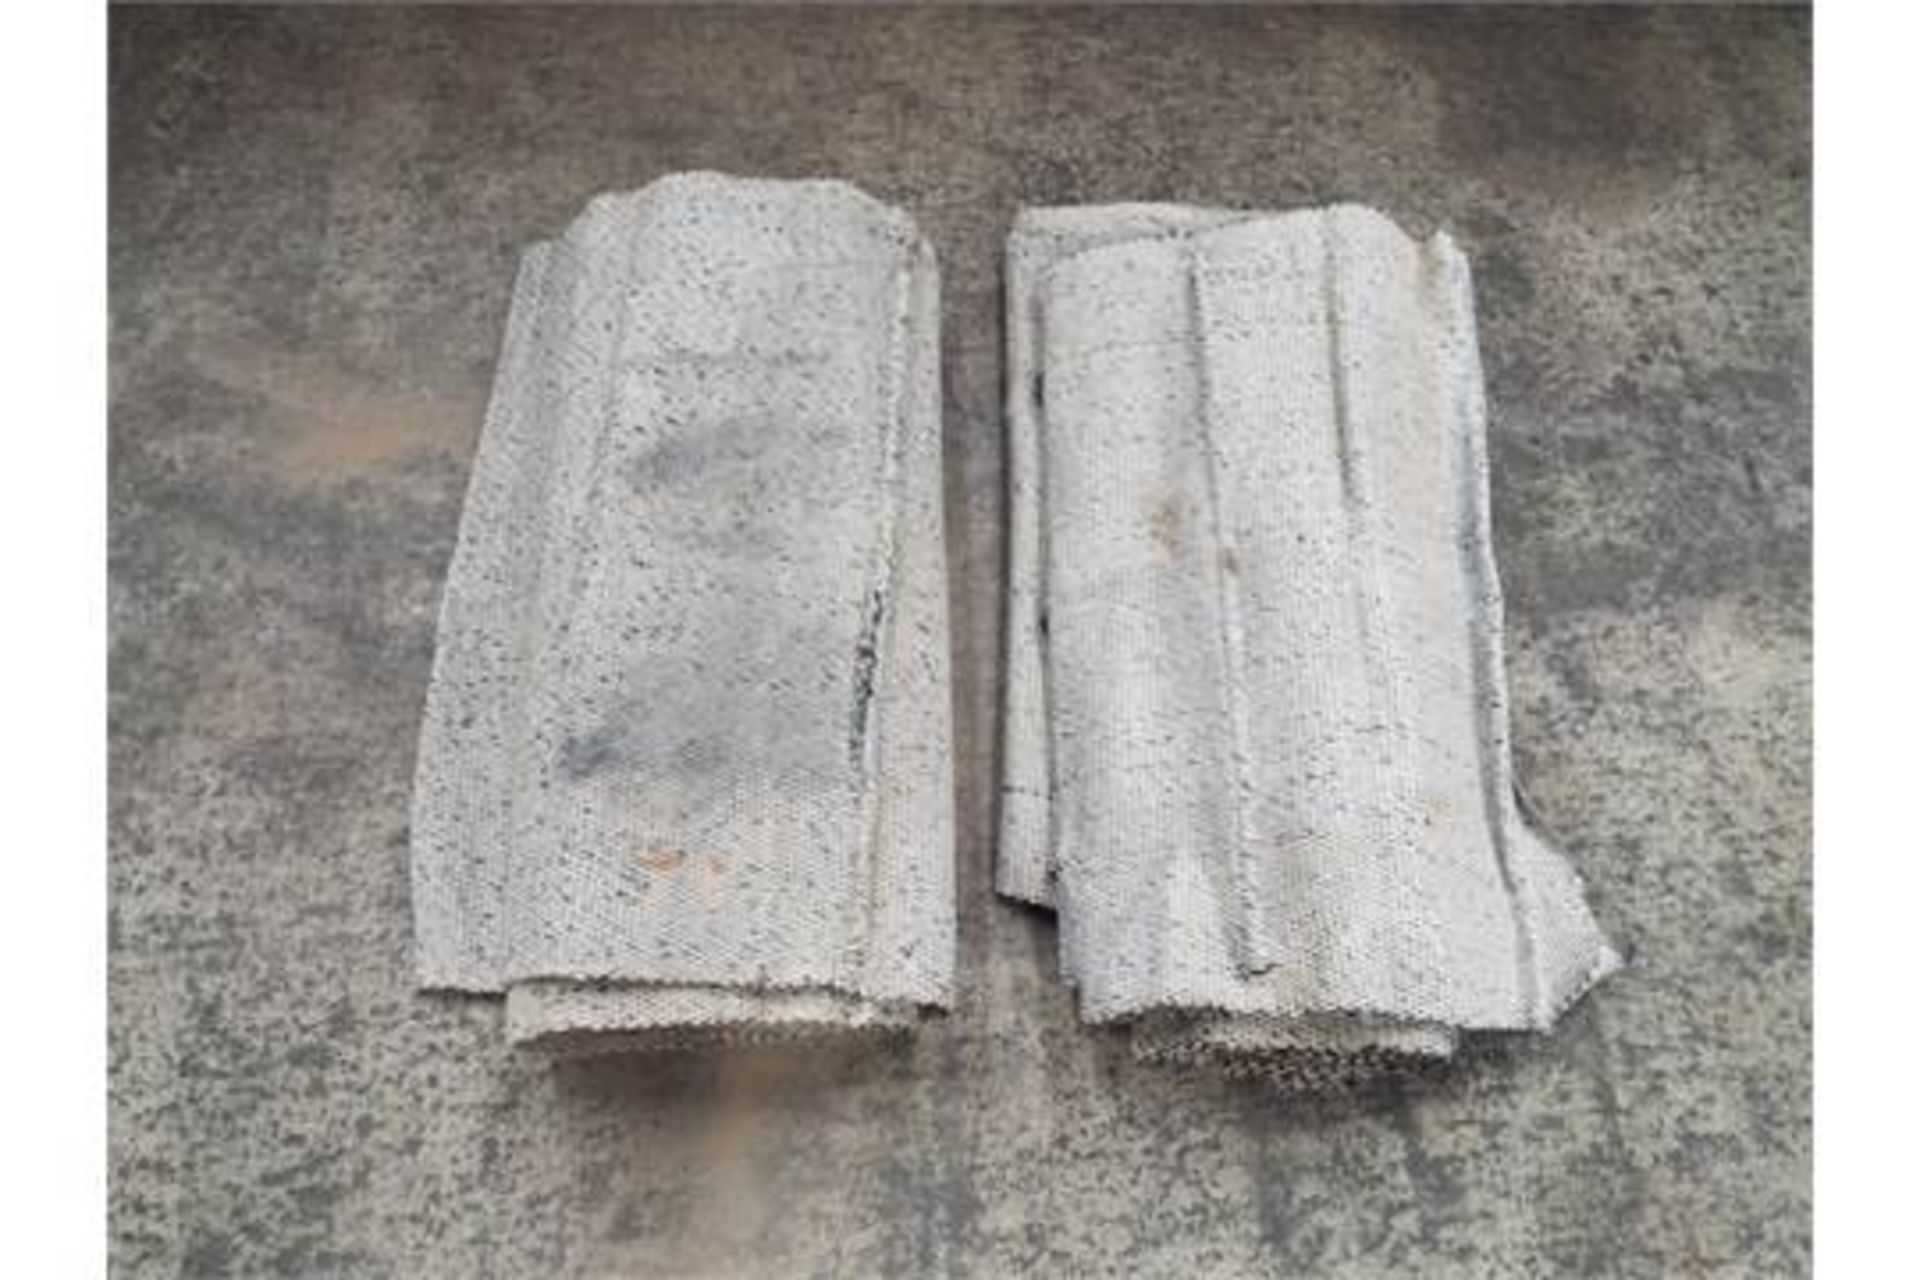 2 x Land Rover 6.8m Traction Mats - Image 4 of 4